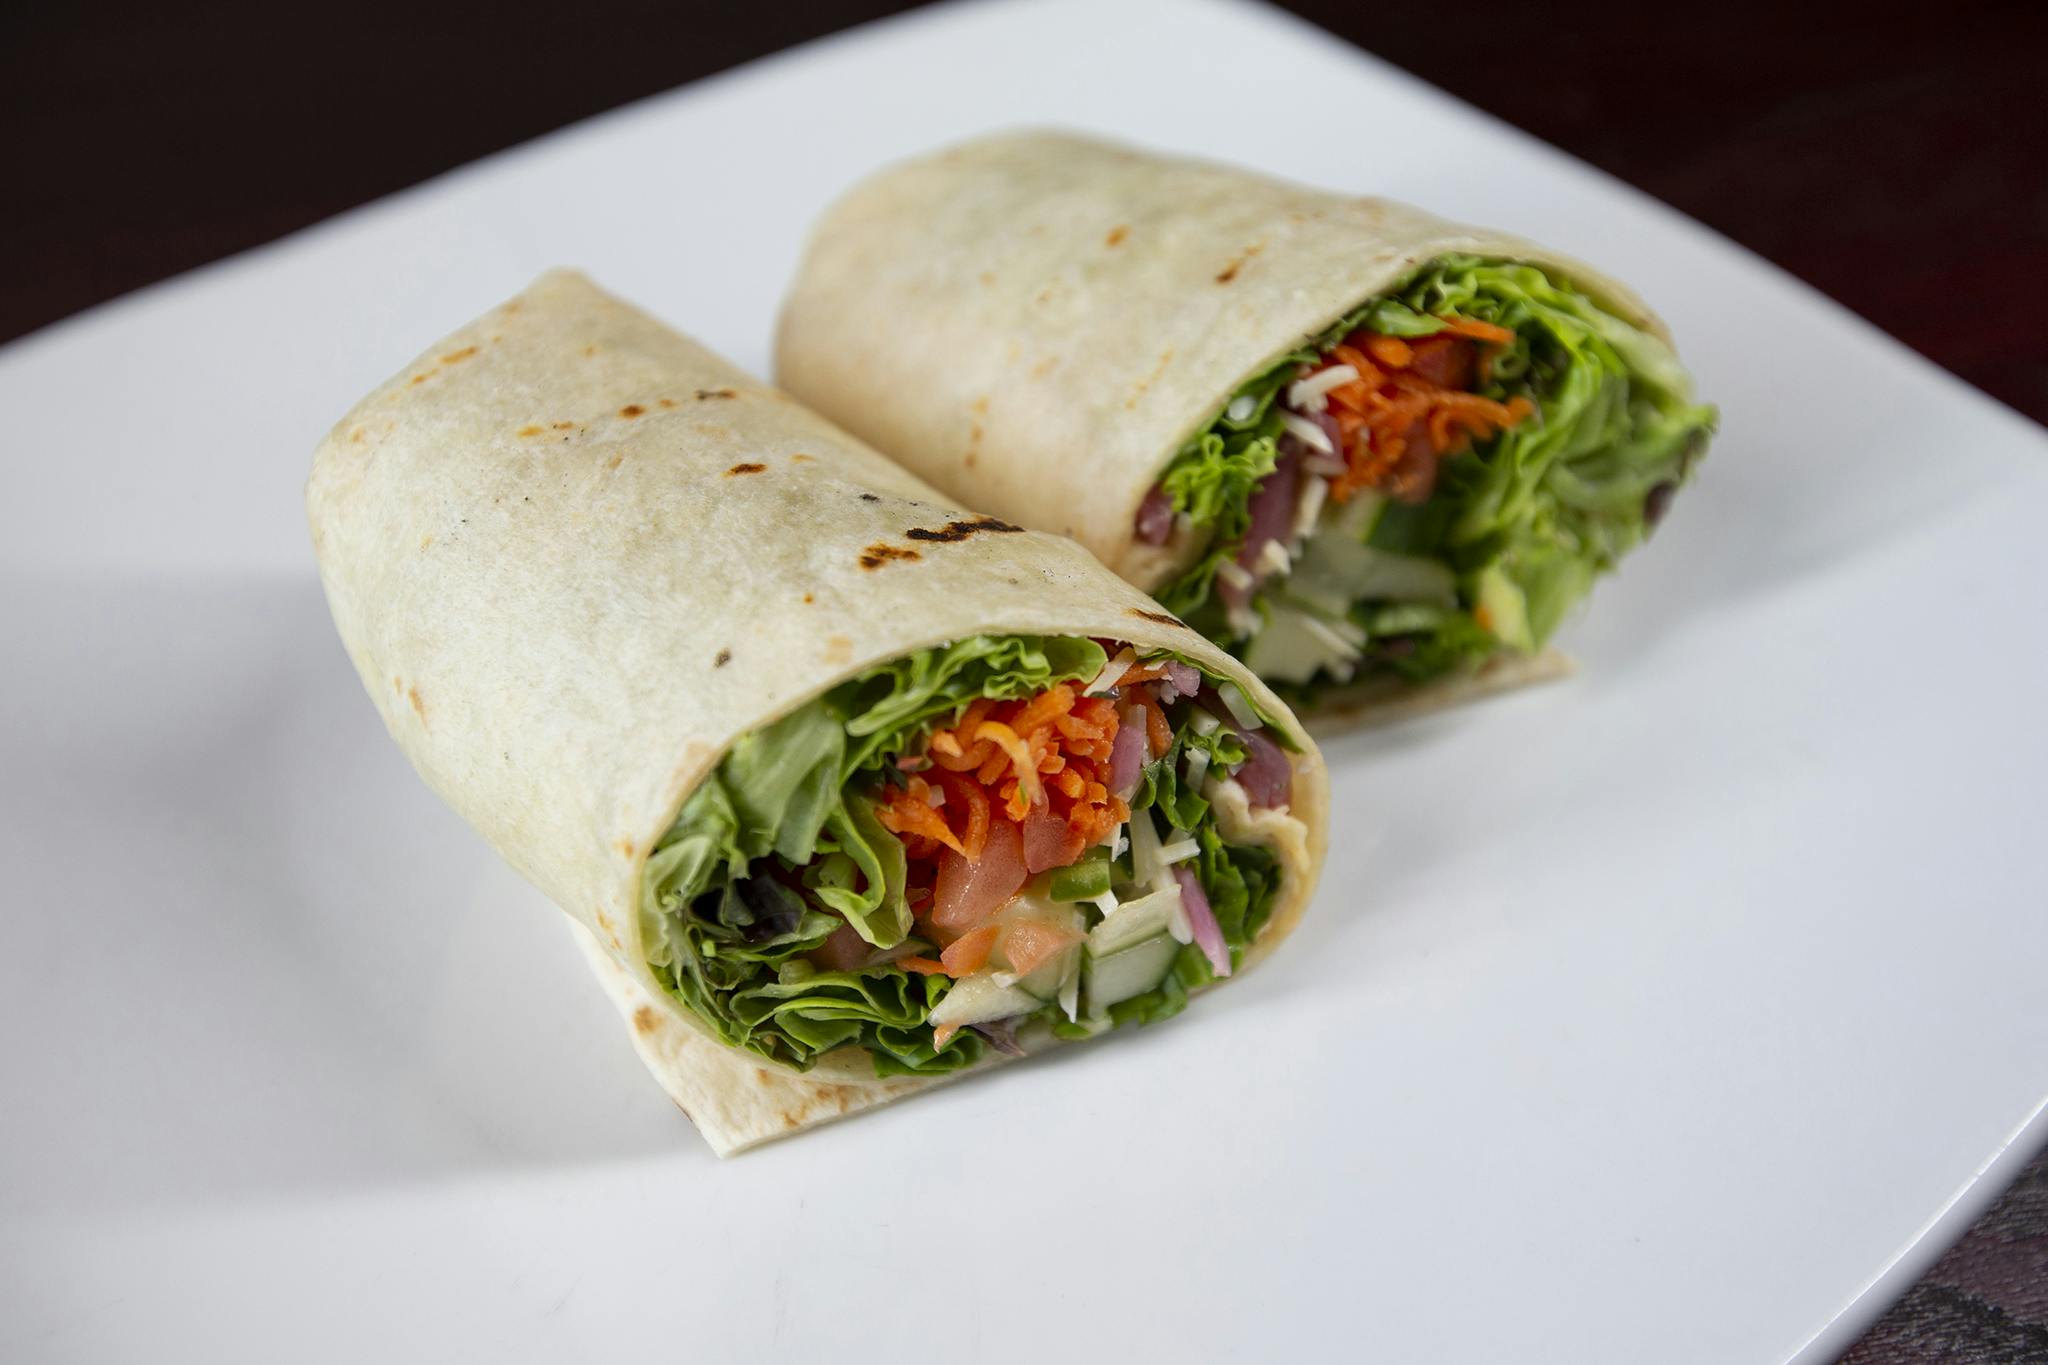 Side Salad Wrap from Firehouse Grill - Chicago Ave in Evanston, IL